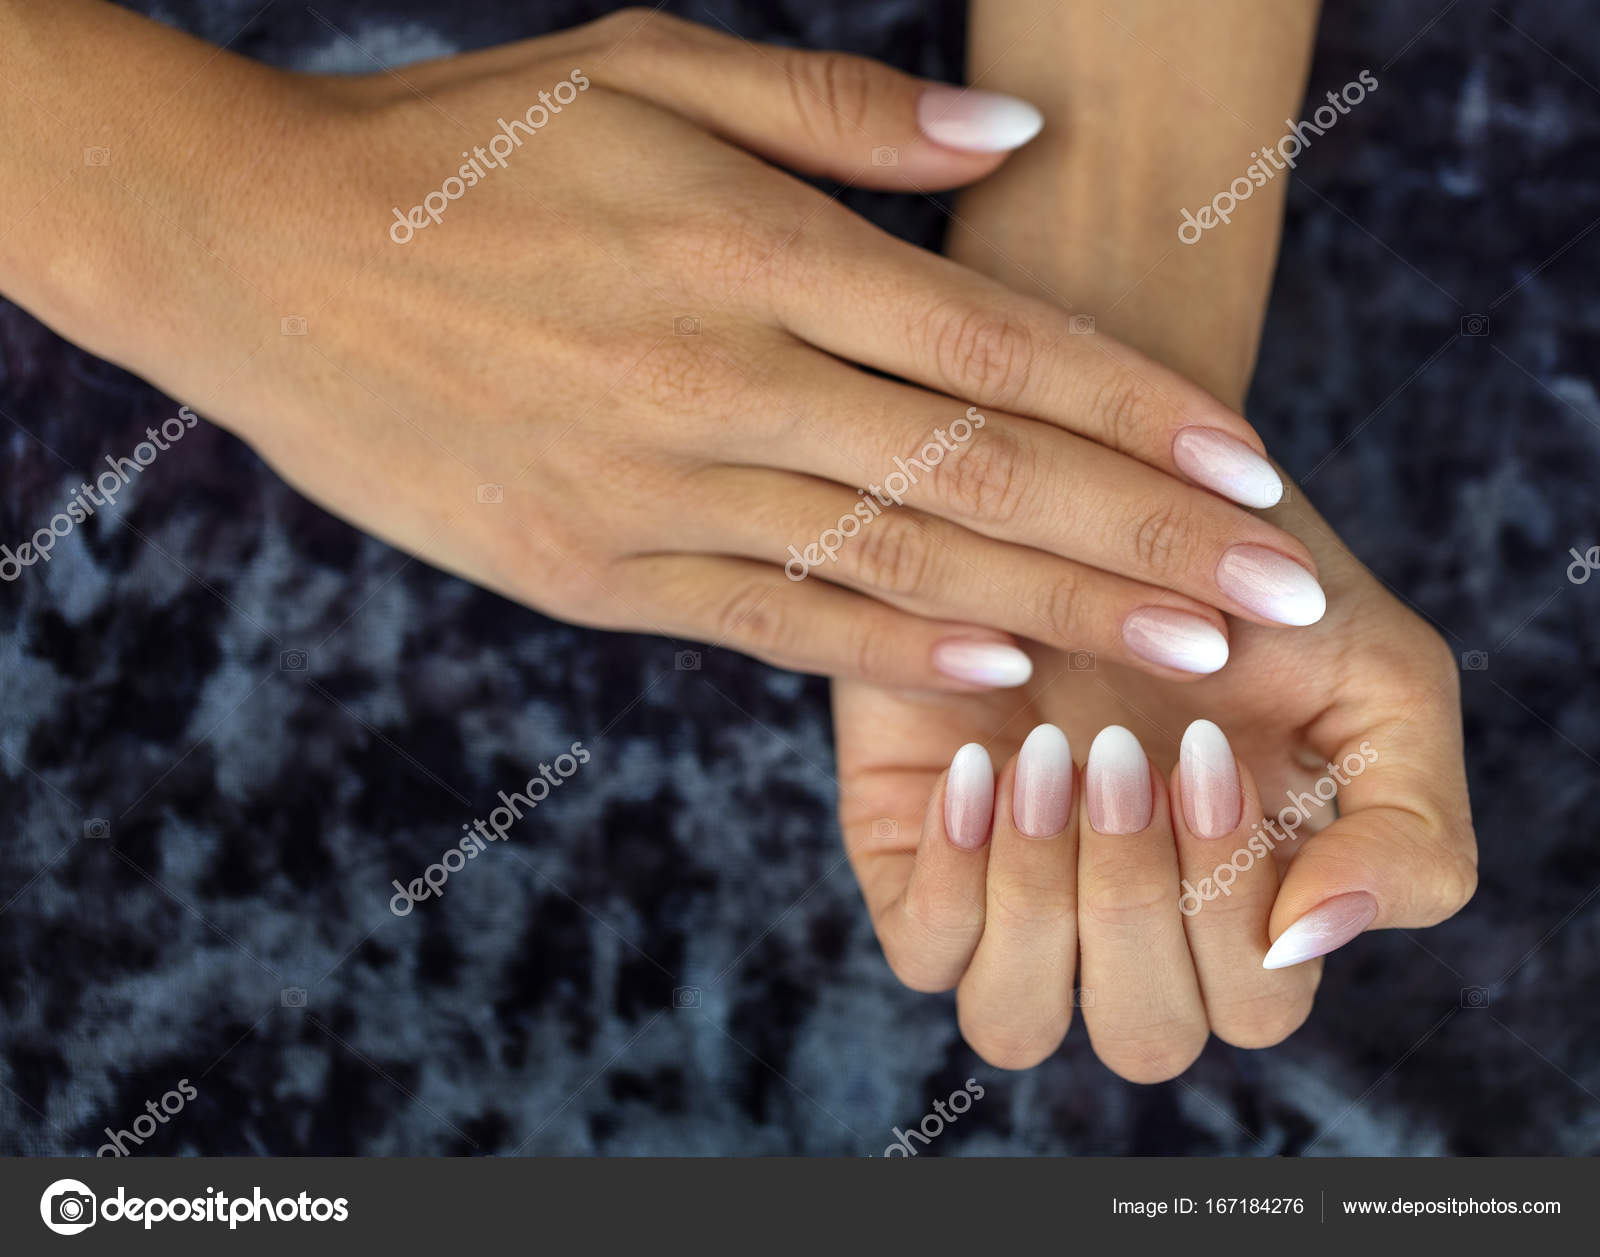 Peach And White Nails Manicure Design French Ombre Peach And White Stock Photo C Photosergii Gmail Com 167184276